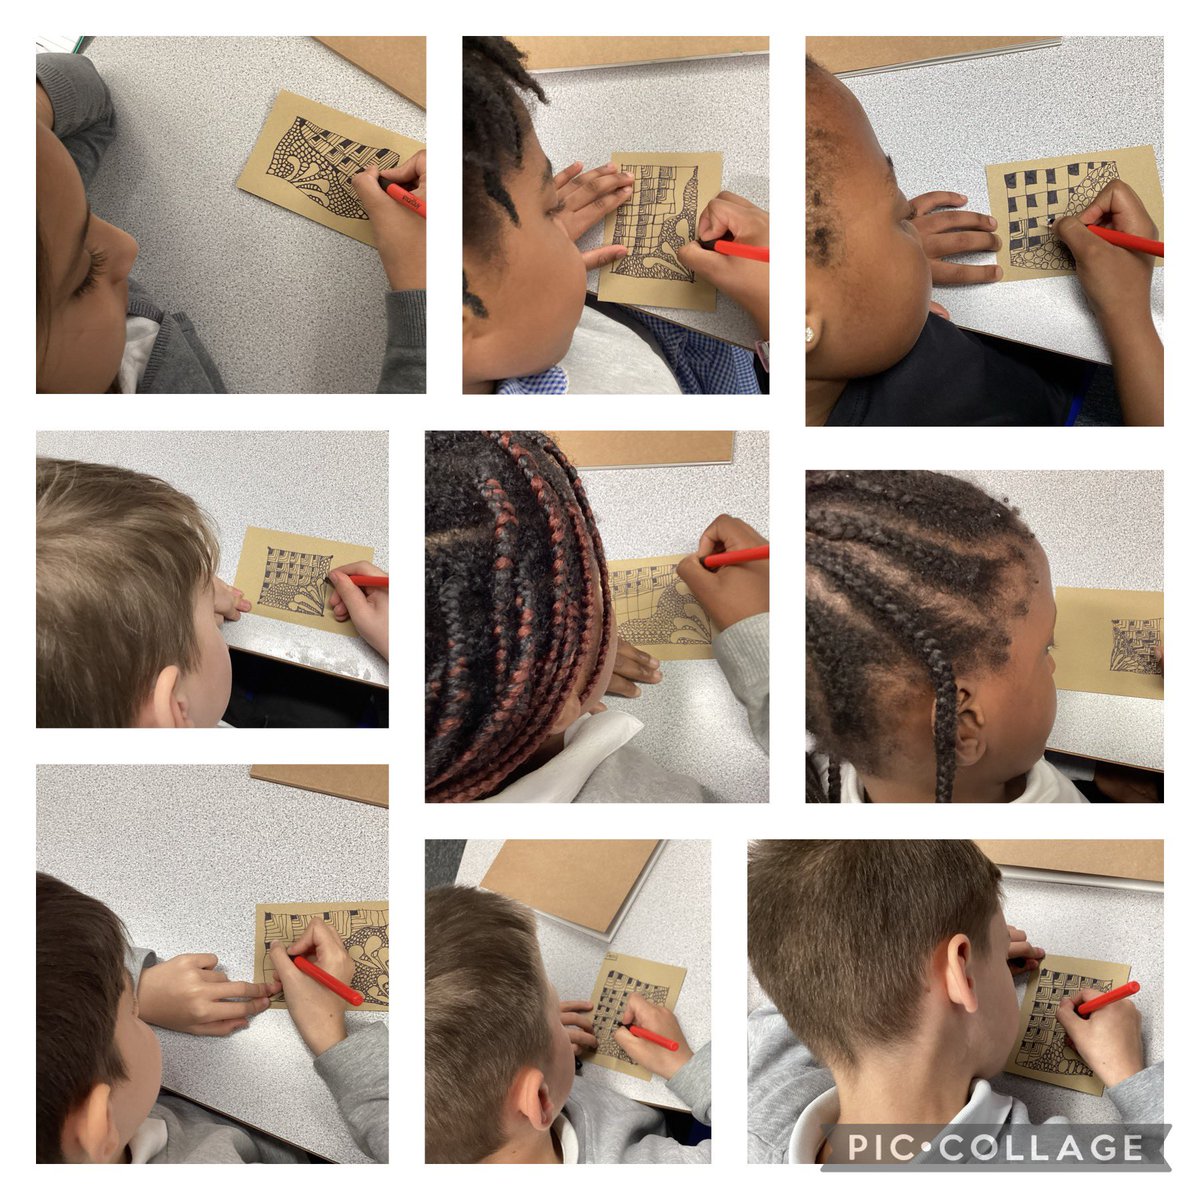 Year 4 Art Lesson Alert.  Today, our young artists explored drawing and the 8- step Zentangle method, using a range of media to create stunning effects.  So proud of their creativity and attention to detail! #art #zentangle #MindfulMoments  #zentangleart